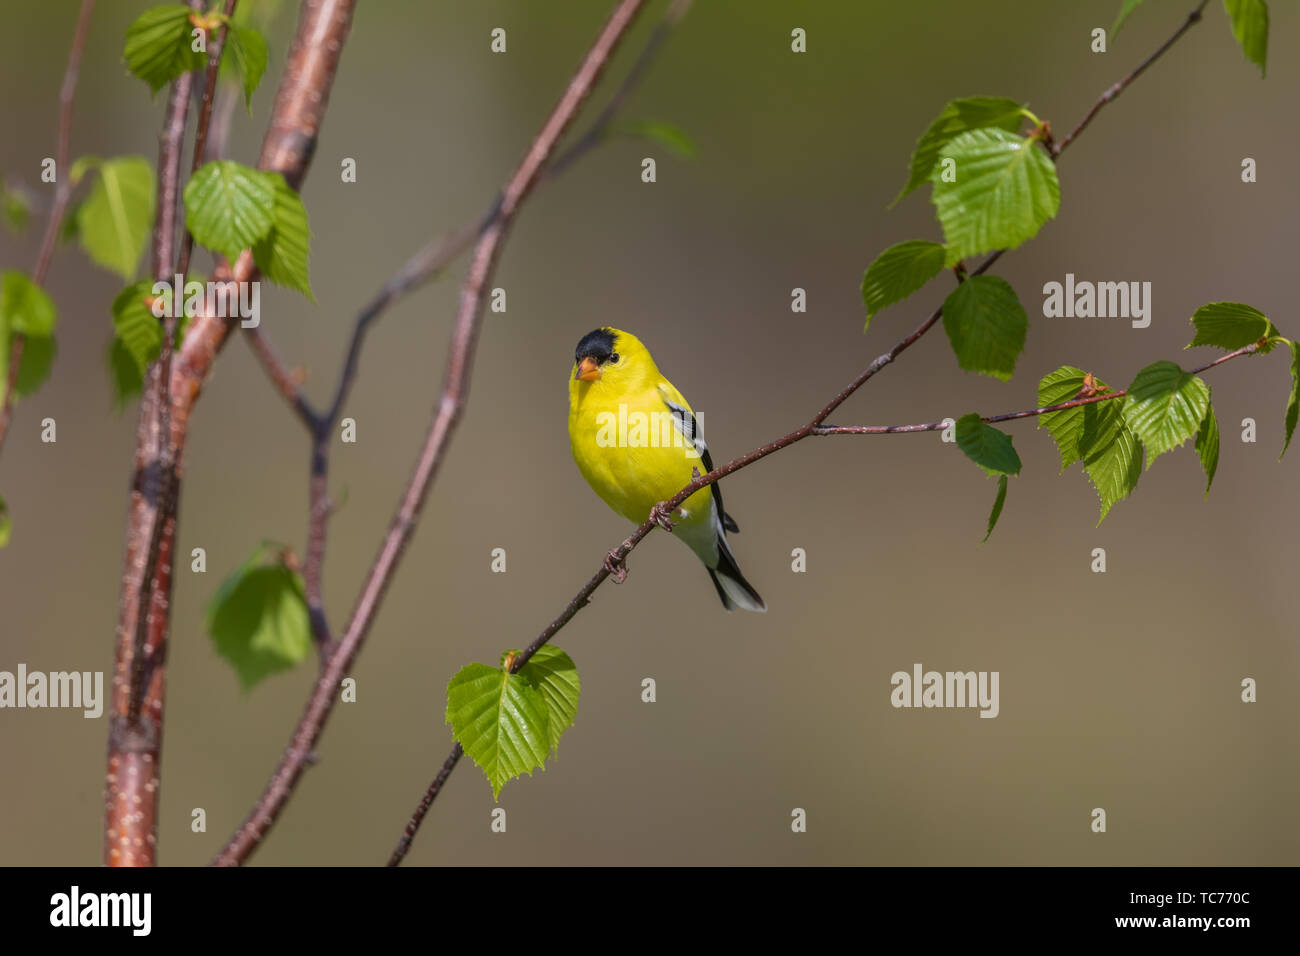 Male American goldfinch perched in a young birch tree. Stock Photo